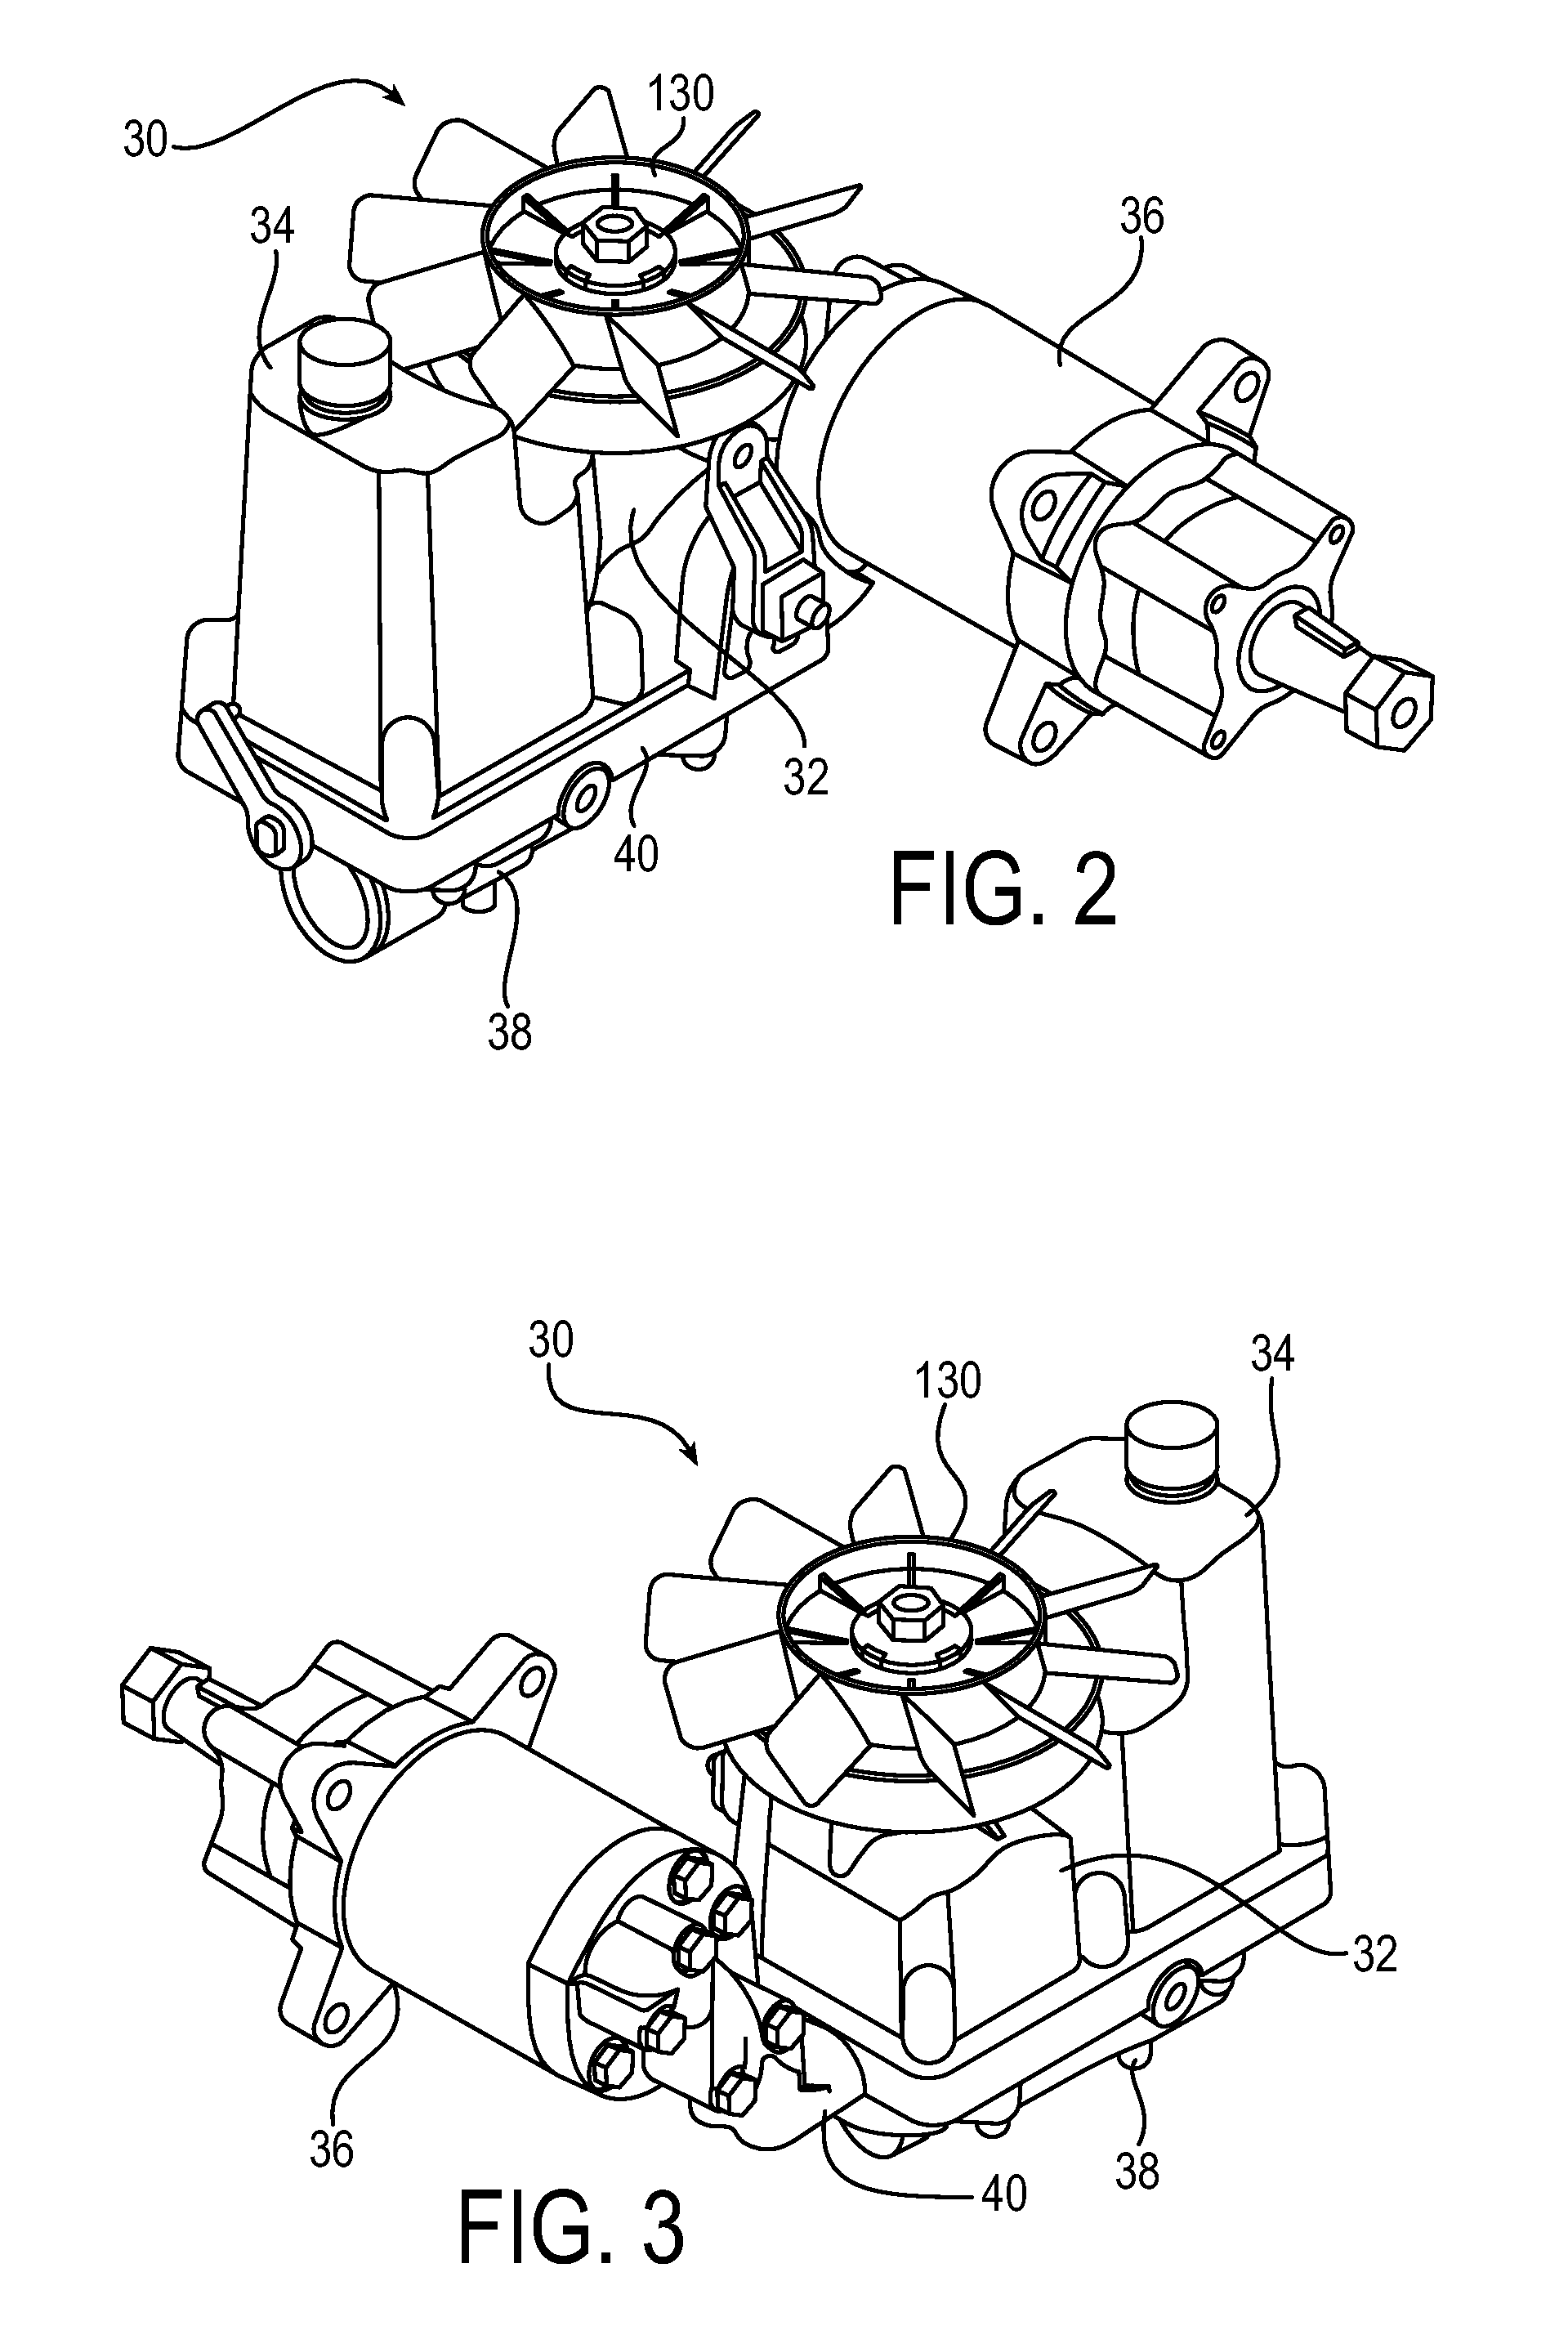 Hydrostatic transmission with integrated pump and motor